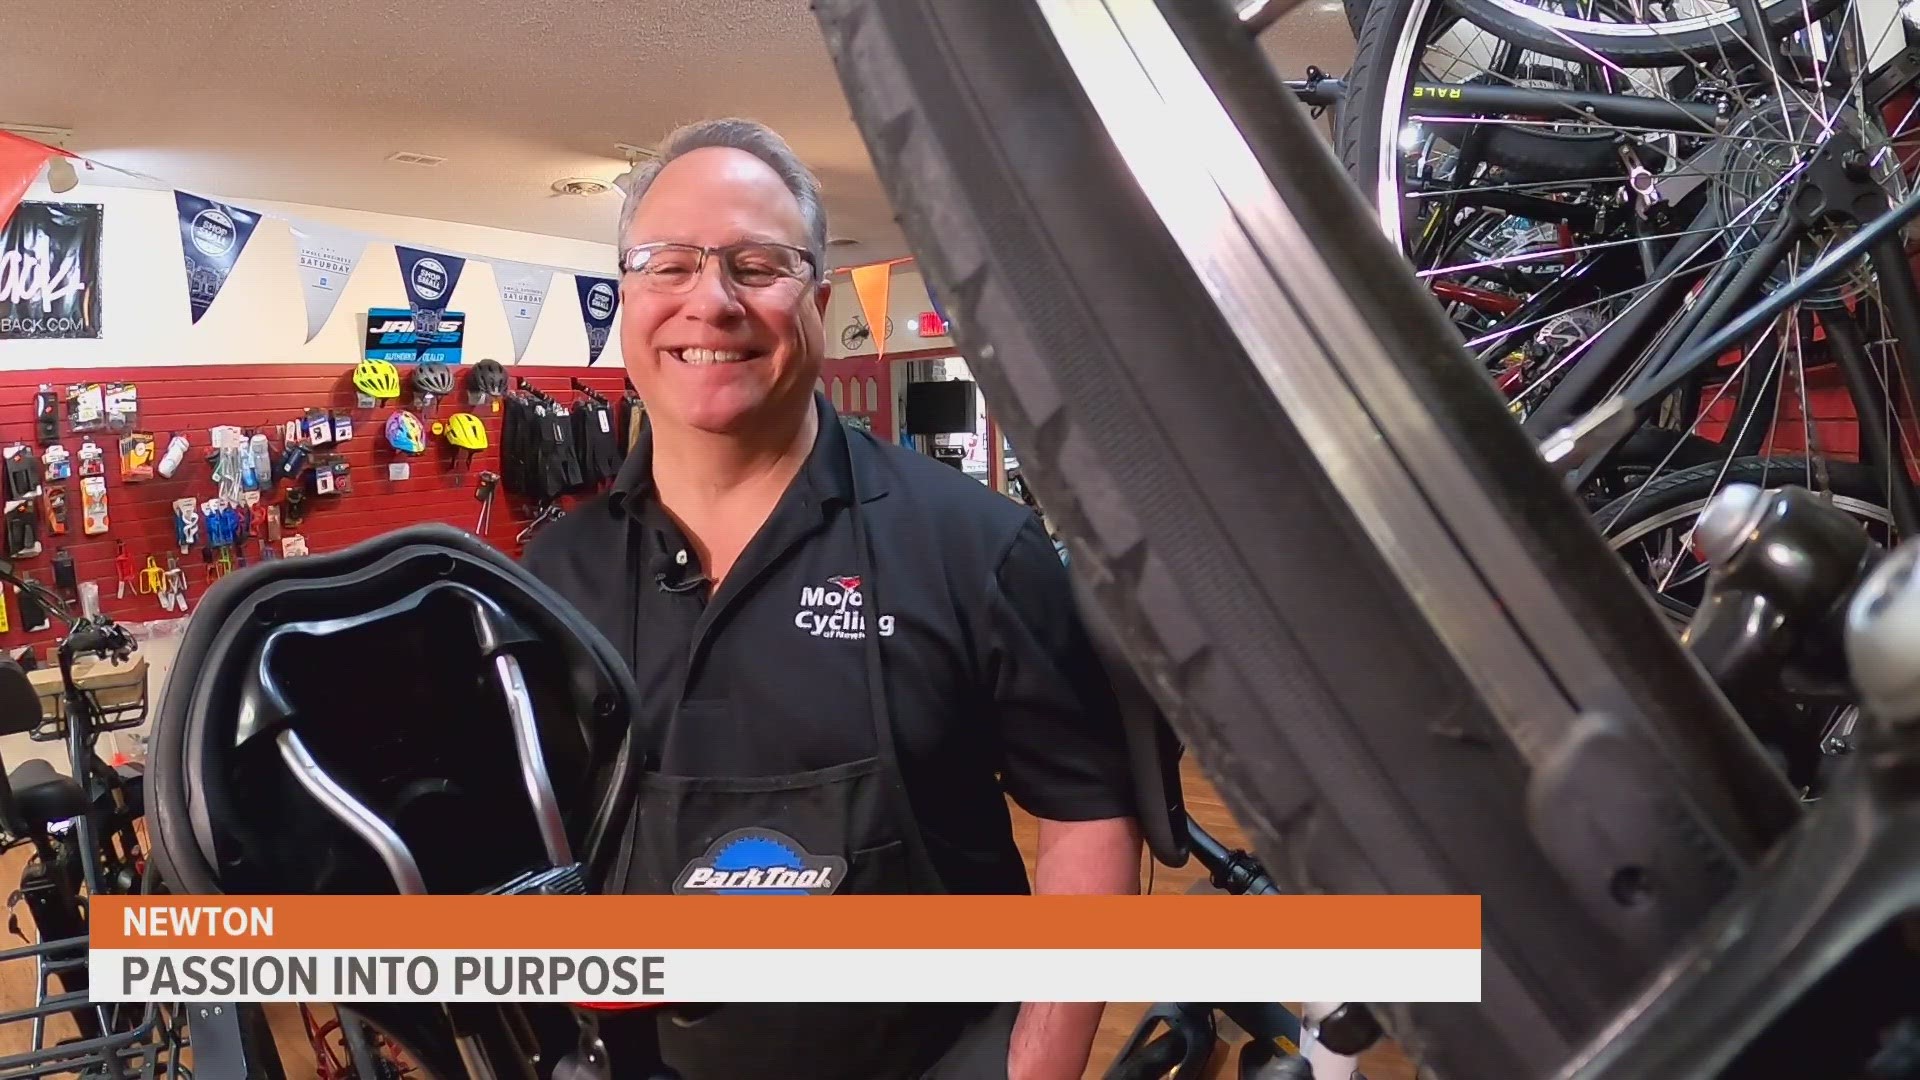 Joe Urias, owner of Mojo Cycling in Newton, knows that not every kid likes to read. But he's trying his best to encourage them — with a bike giveaway in May.